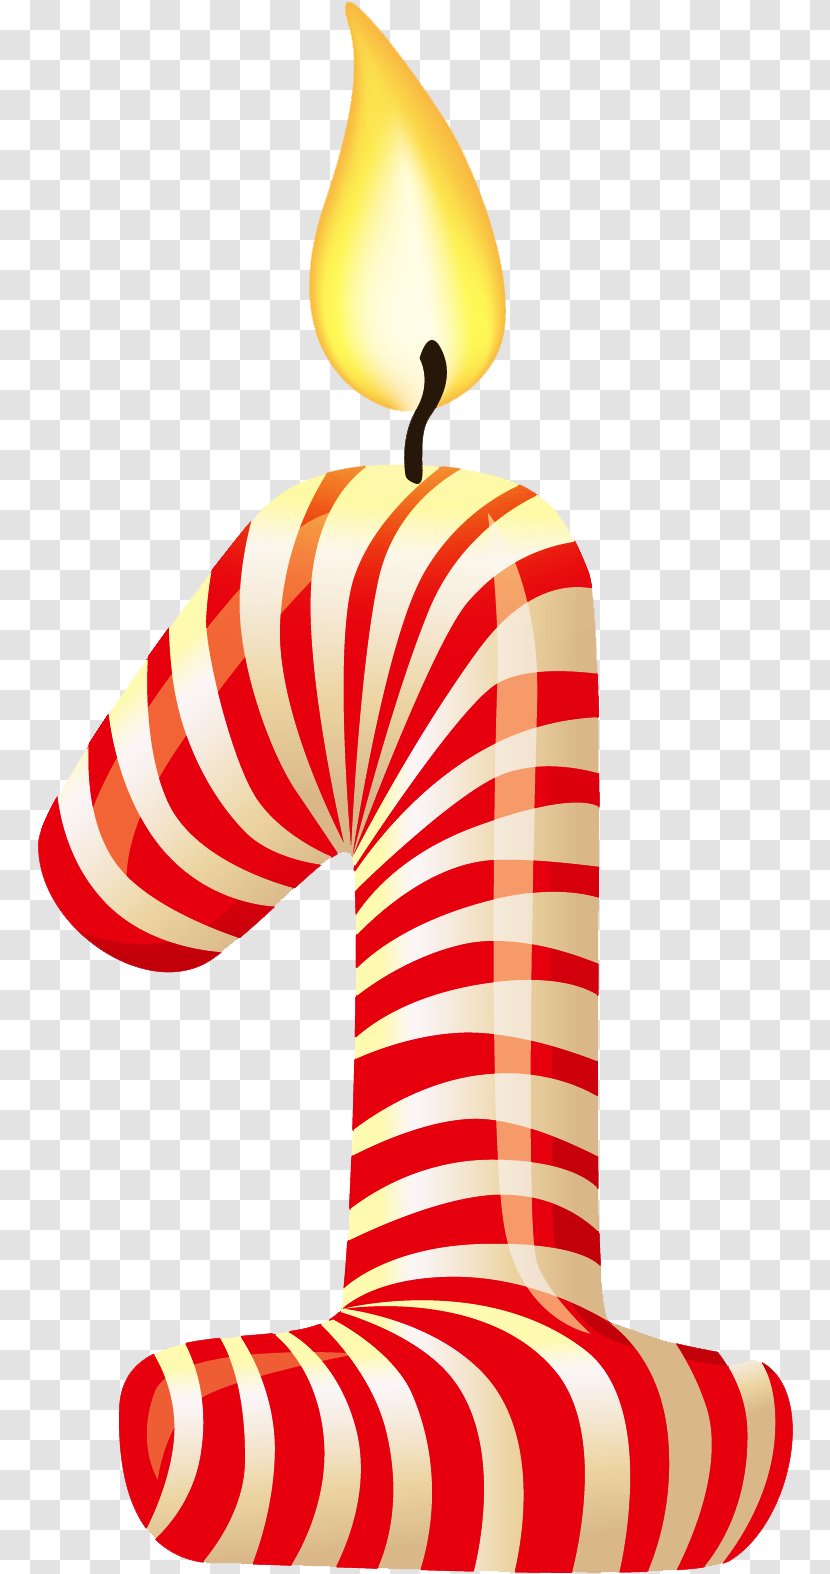 Candy Cane - Holiday Ornament Transparent PNG